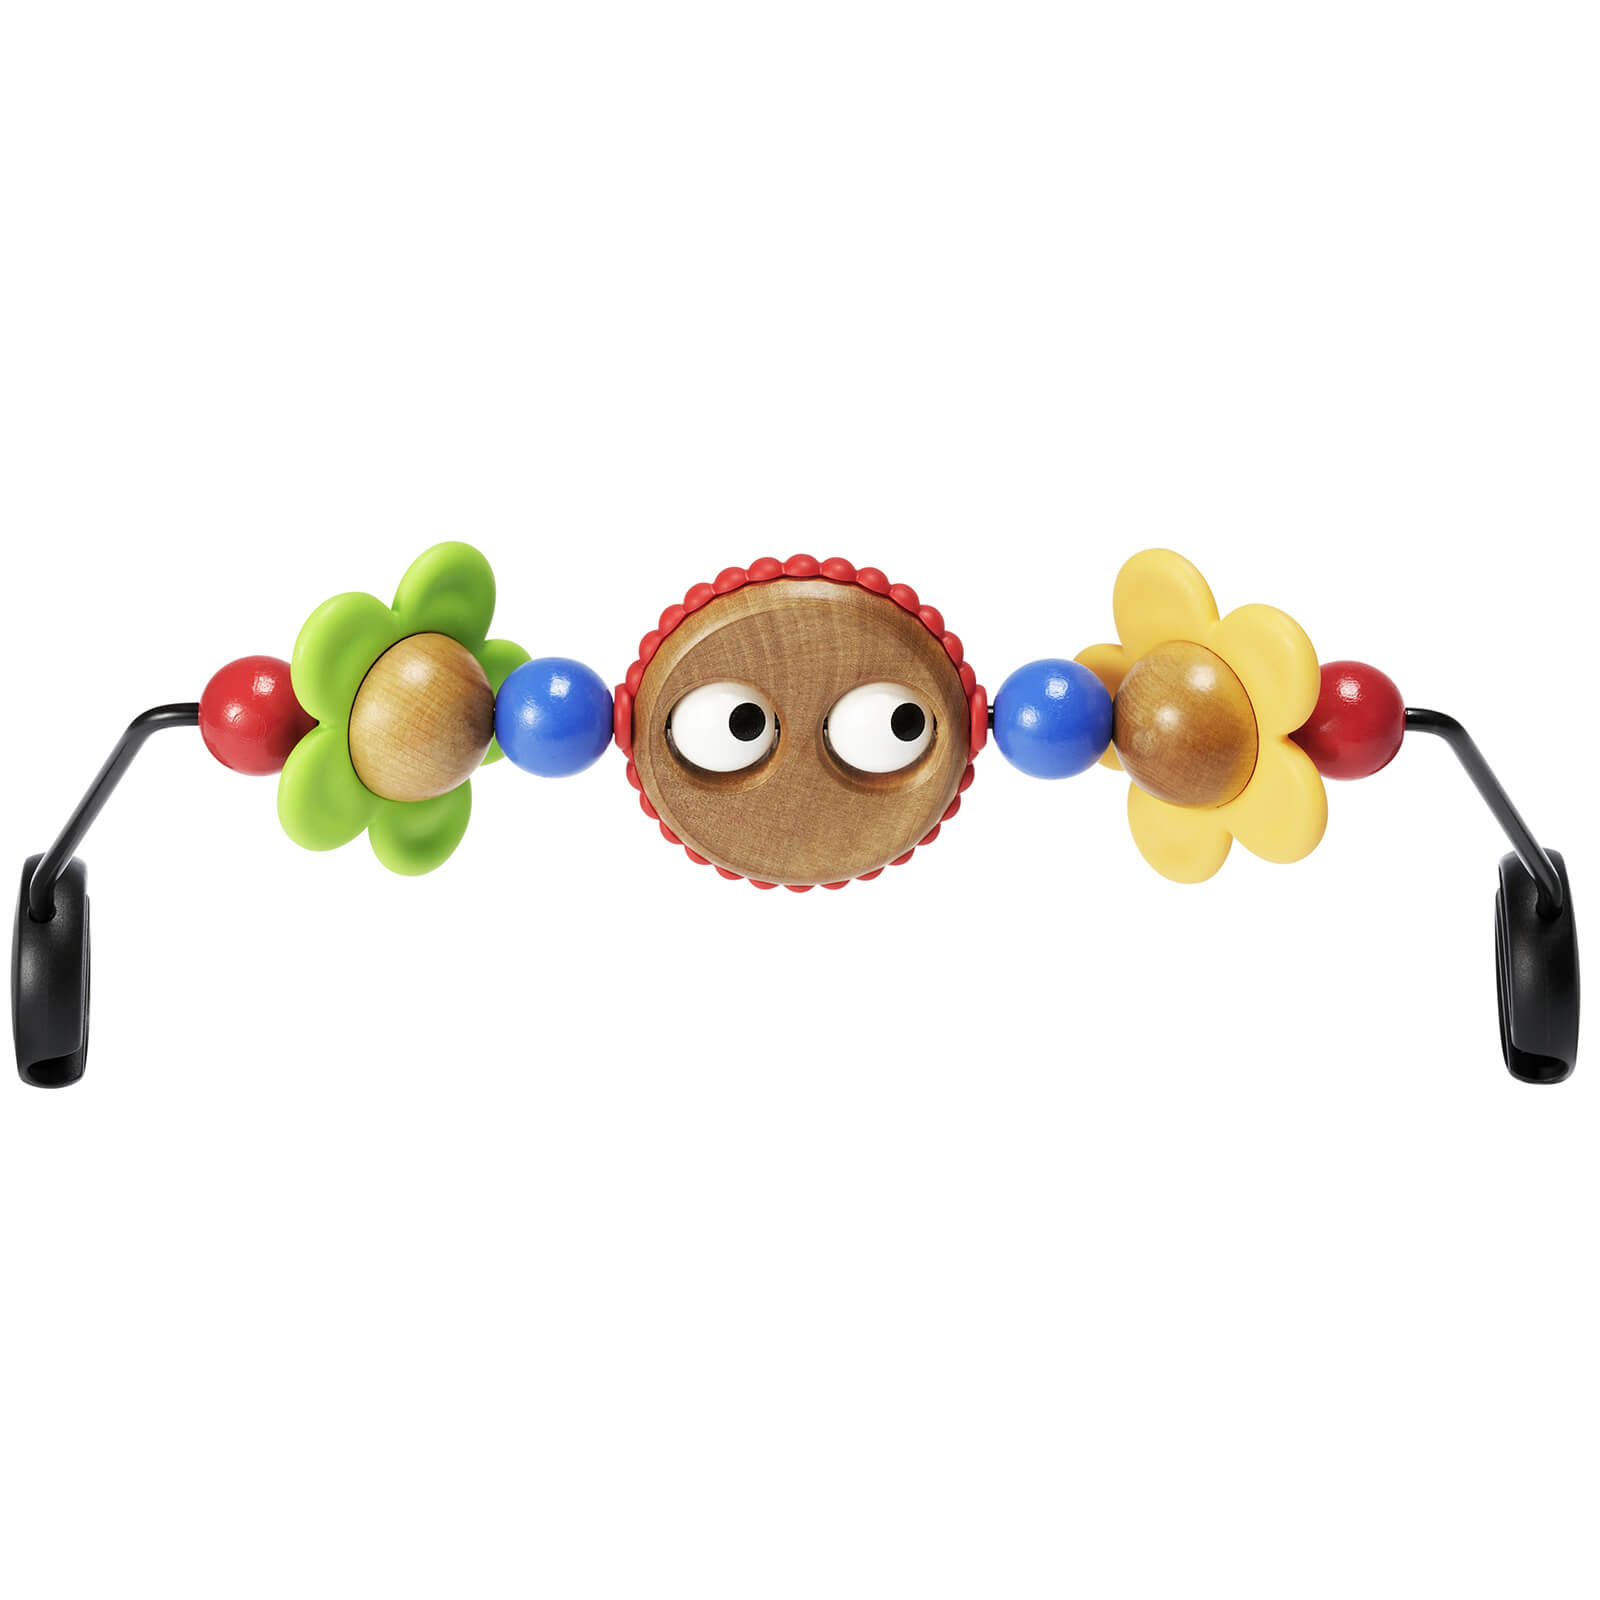 BABYBJORN Toy for Bouncers - Googly Eyes